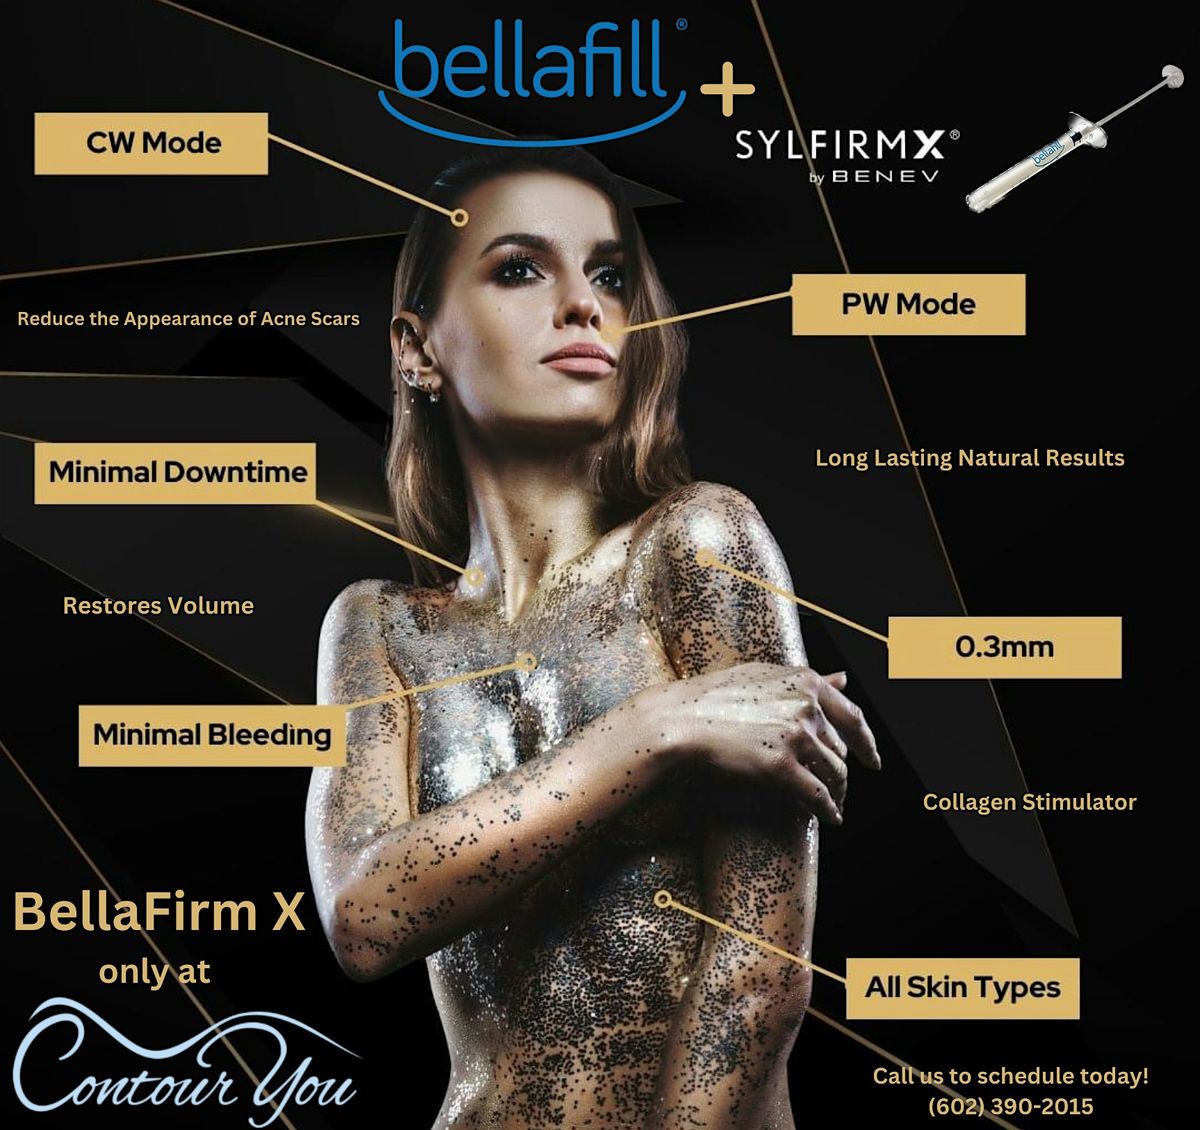 LUNCH & LEARN - BELLAFILL AND SYLFIRM X WITH US!